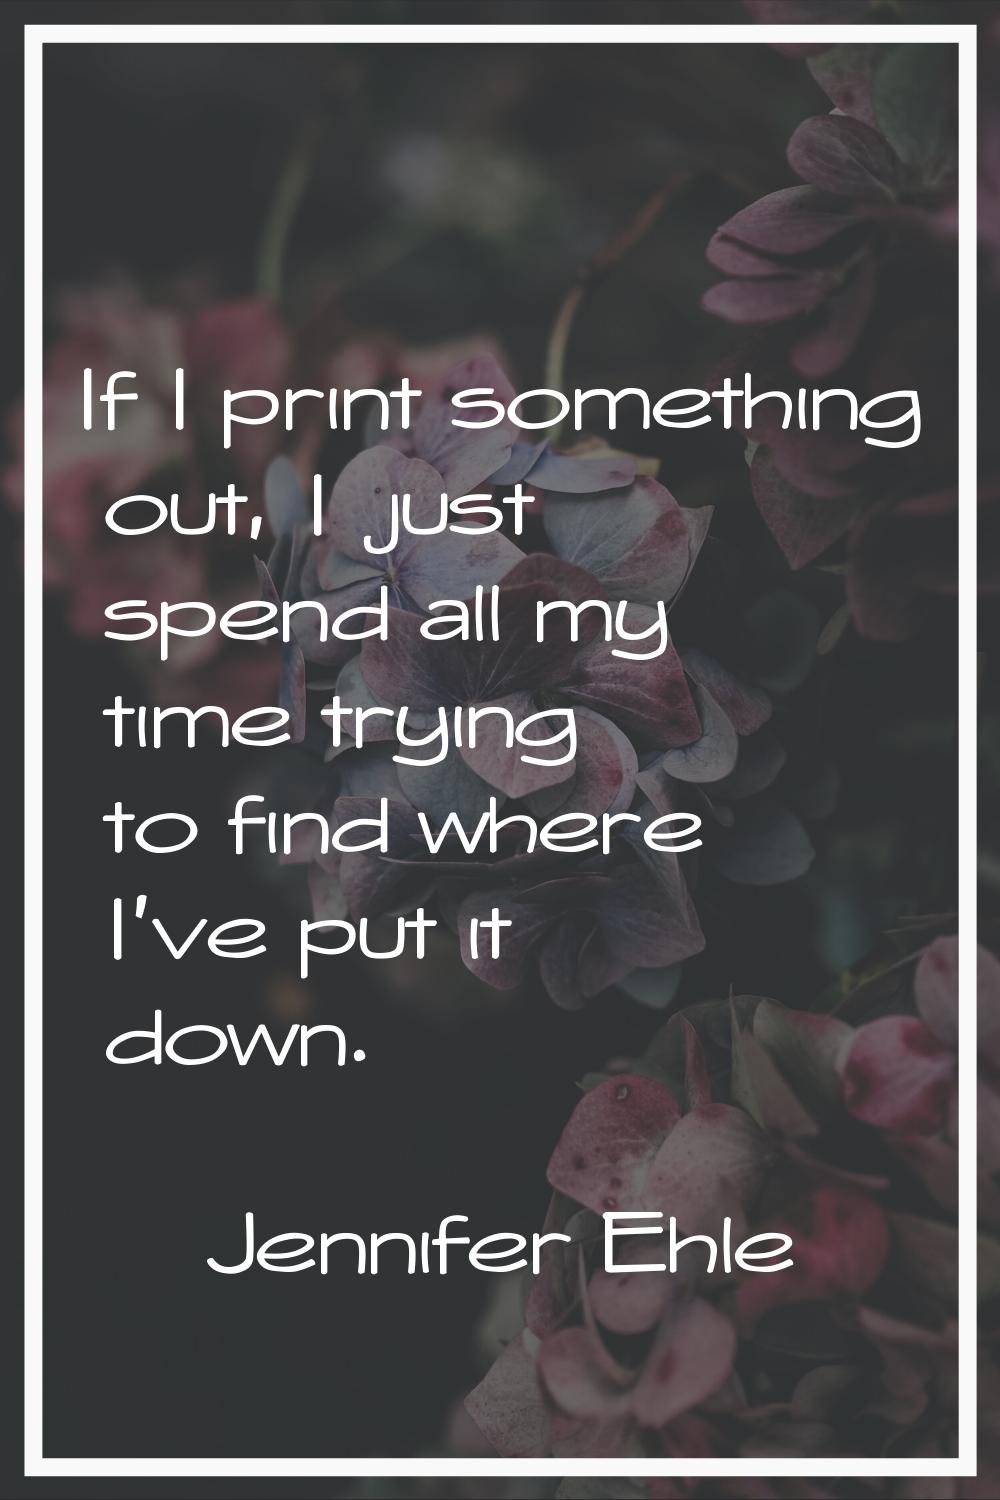 If I print something out, I just spend all my time trying to find where I've put it down.